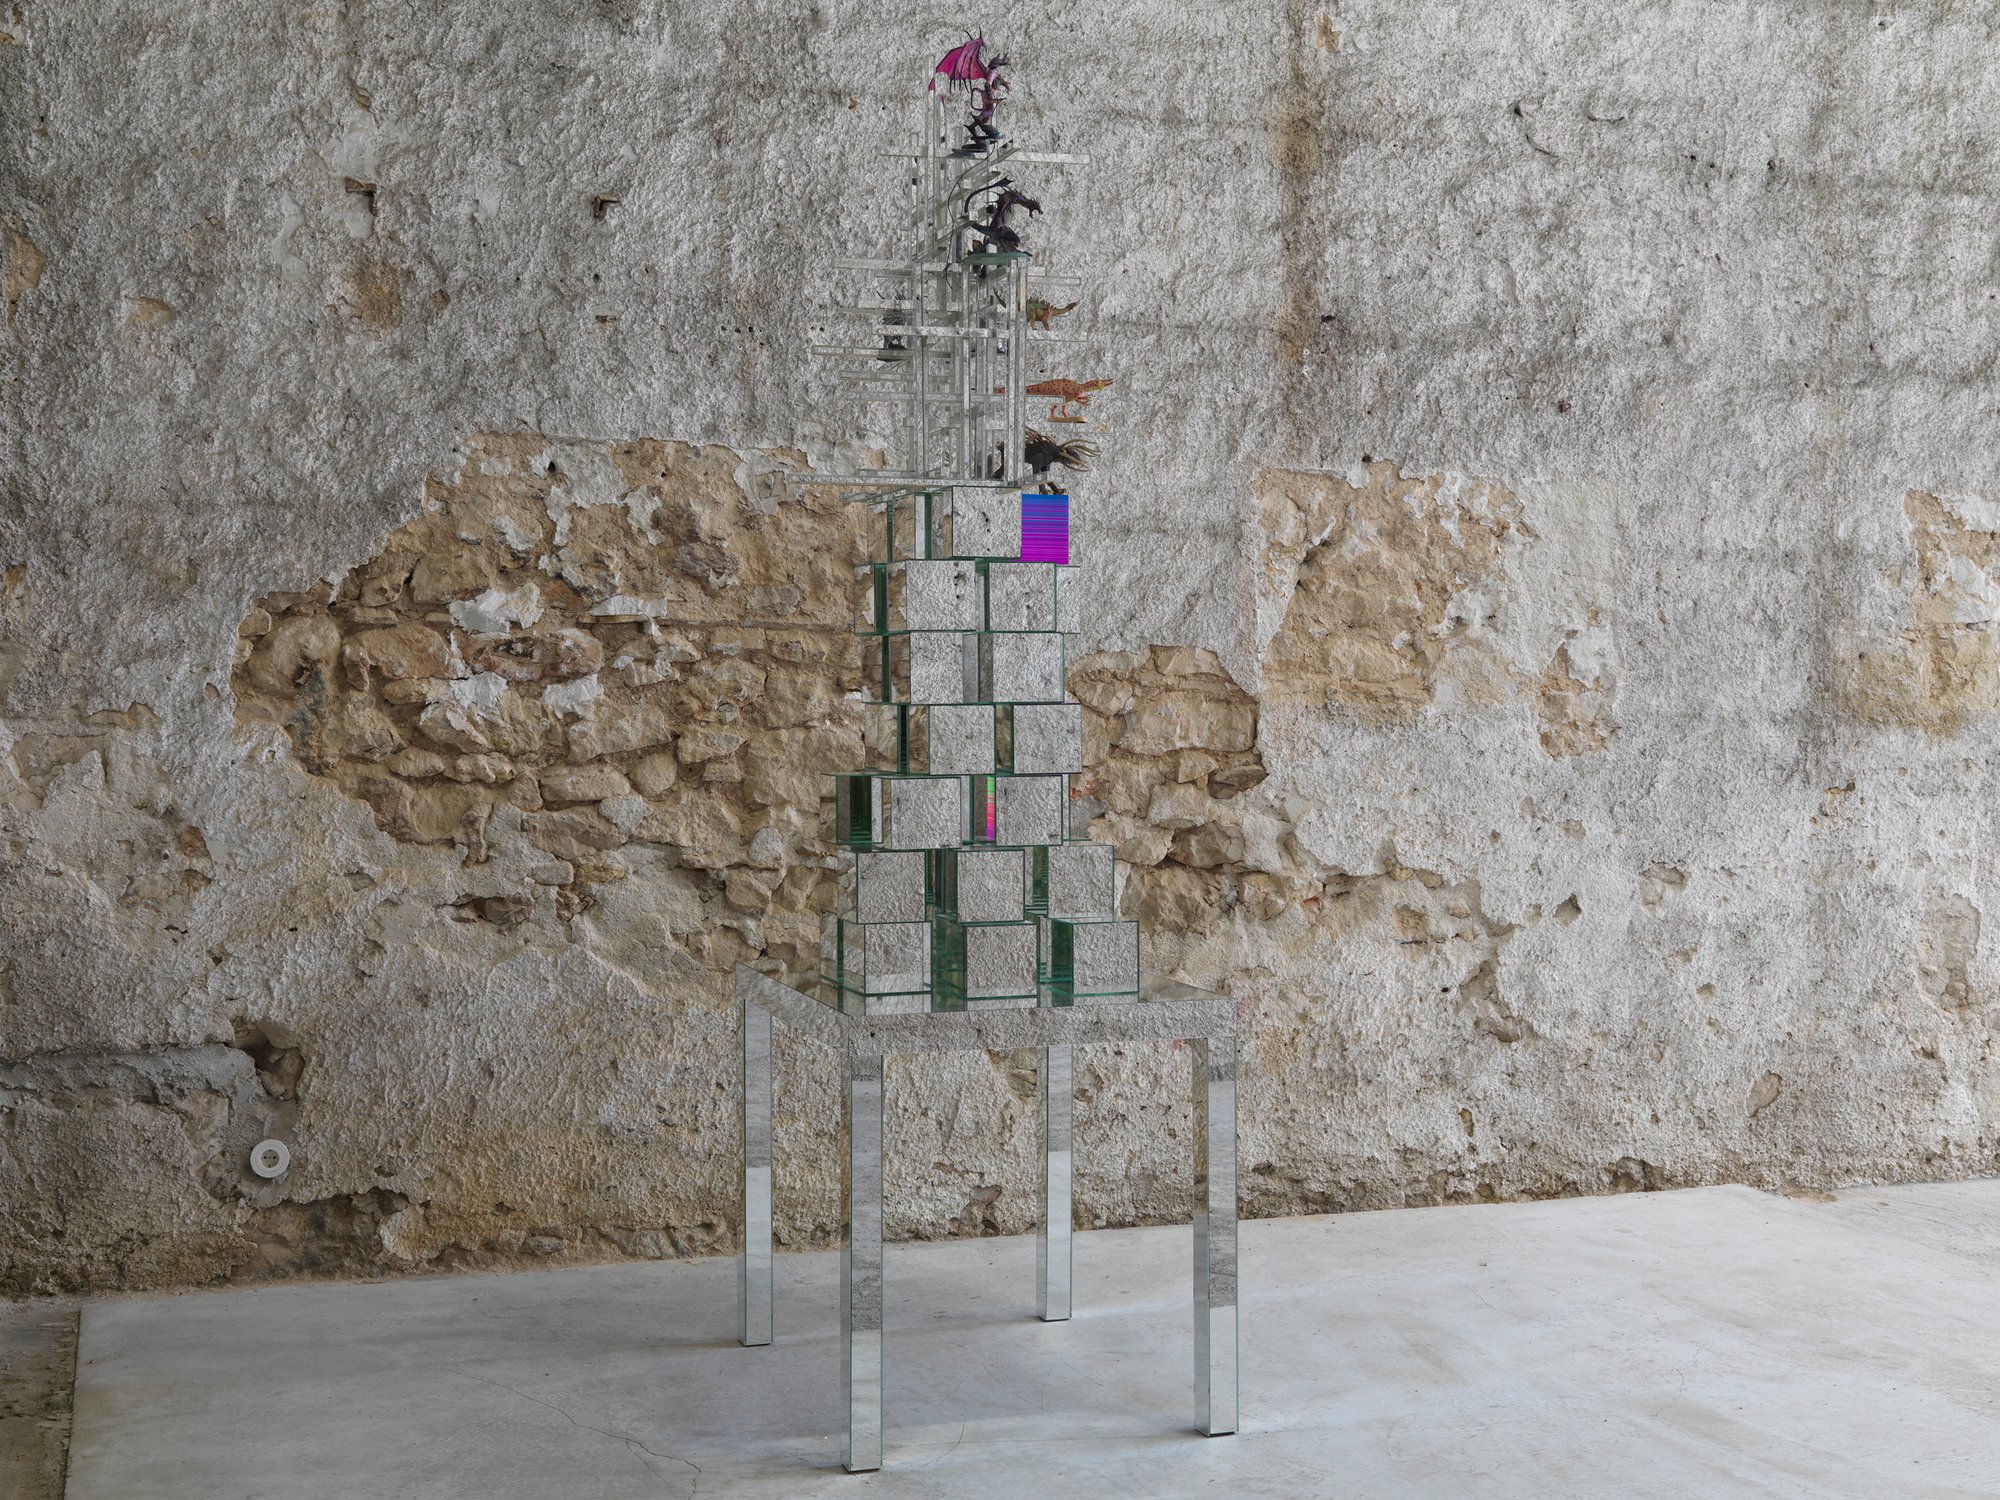 Thanasis Totsikas, Glass Tower, mirrors, air brush car paint on aluminum, plastic zombie toys, steel and mirror table, dimensions variable, 2008. Installation view, Miracles, Rodeo, Piraeus, 2022